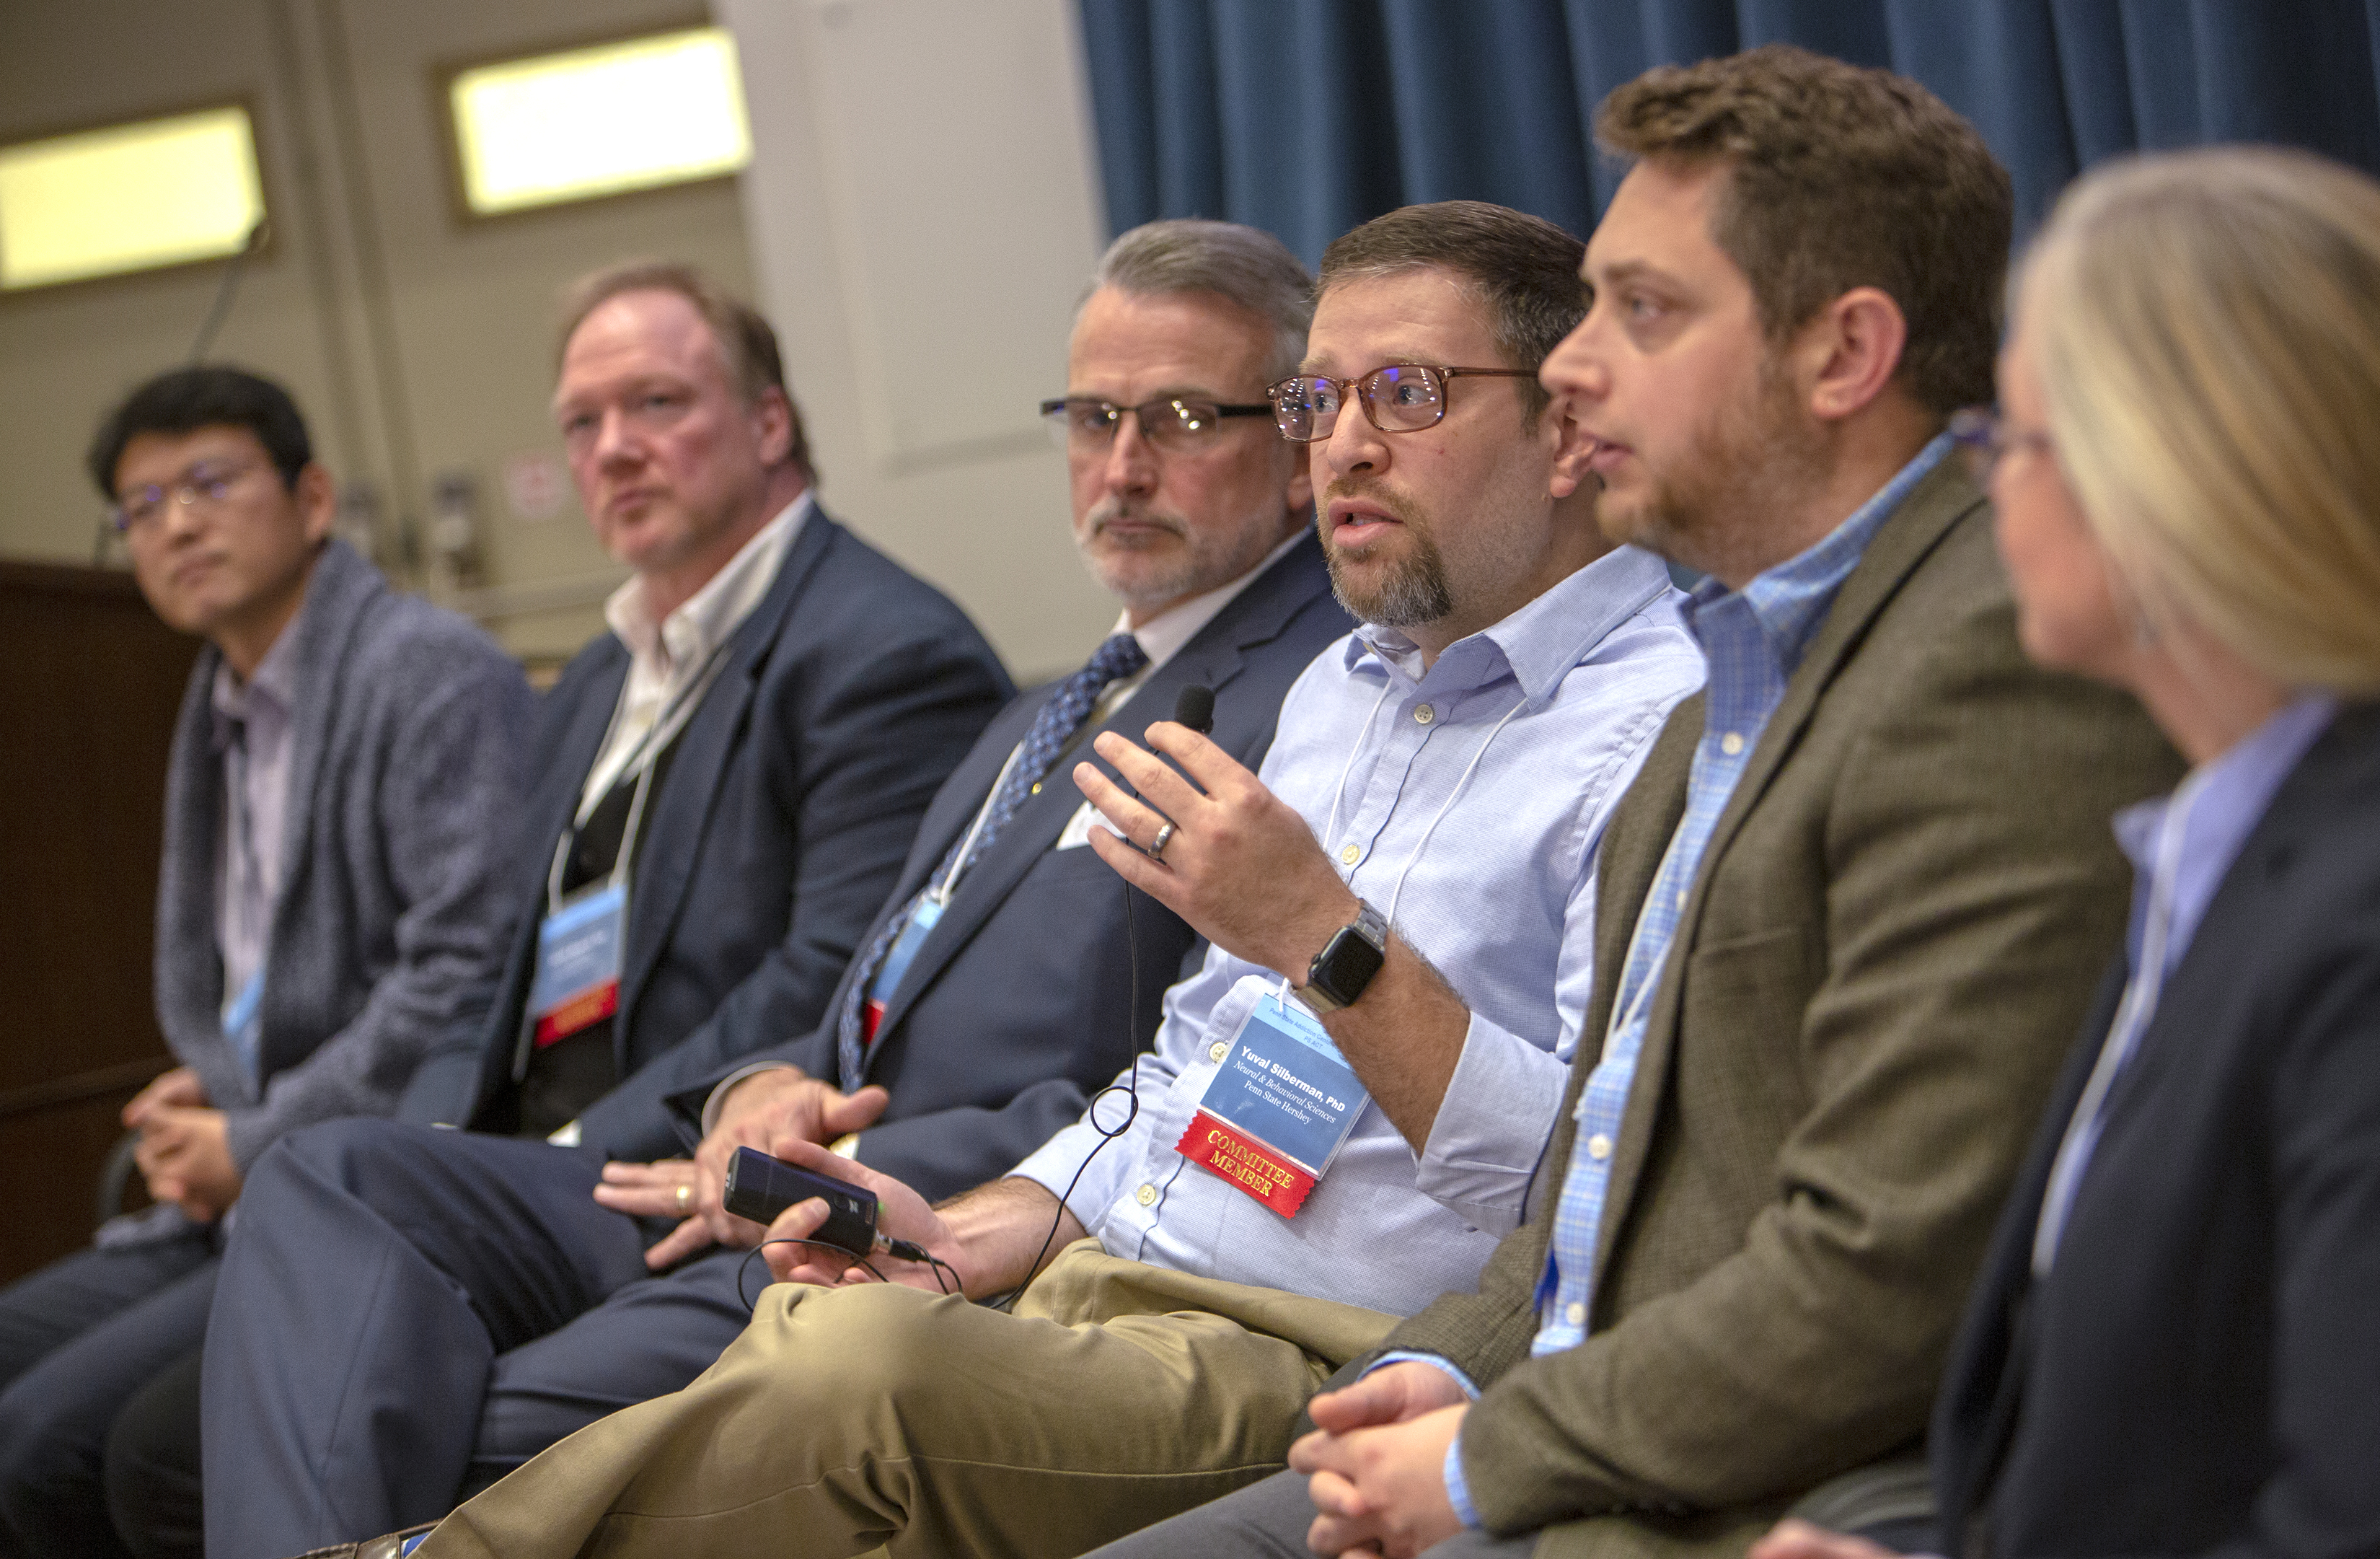 A group of six experts sit in a line during a panel discussion session. They are dressed in suits and wear committee member badges around their necks. The man third from right gestures with his hand as he speaks to the off-camera audience.